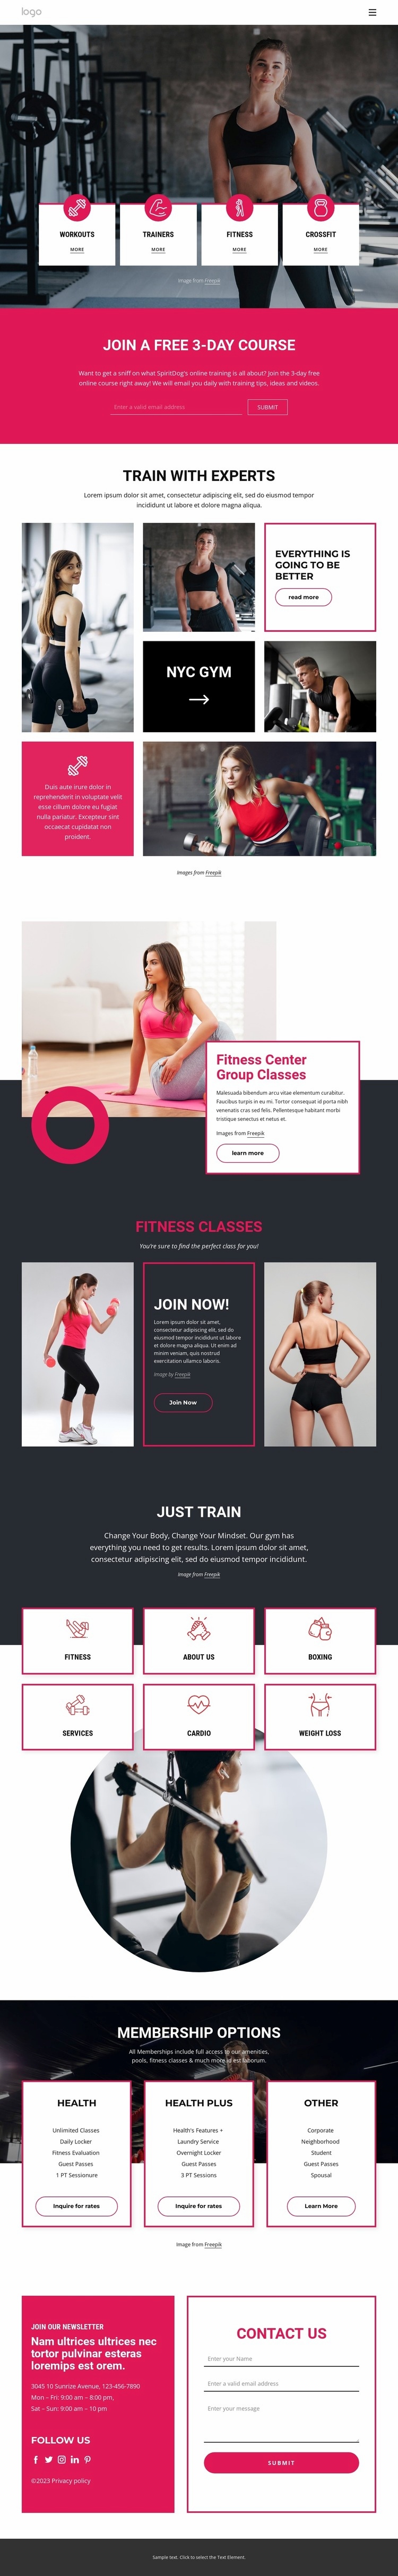 Join a Crossfit gym Wix Template Alternative